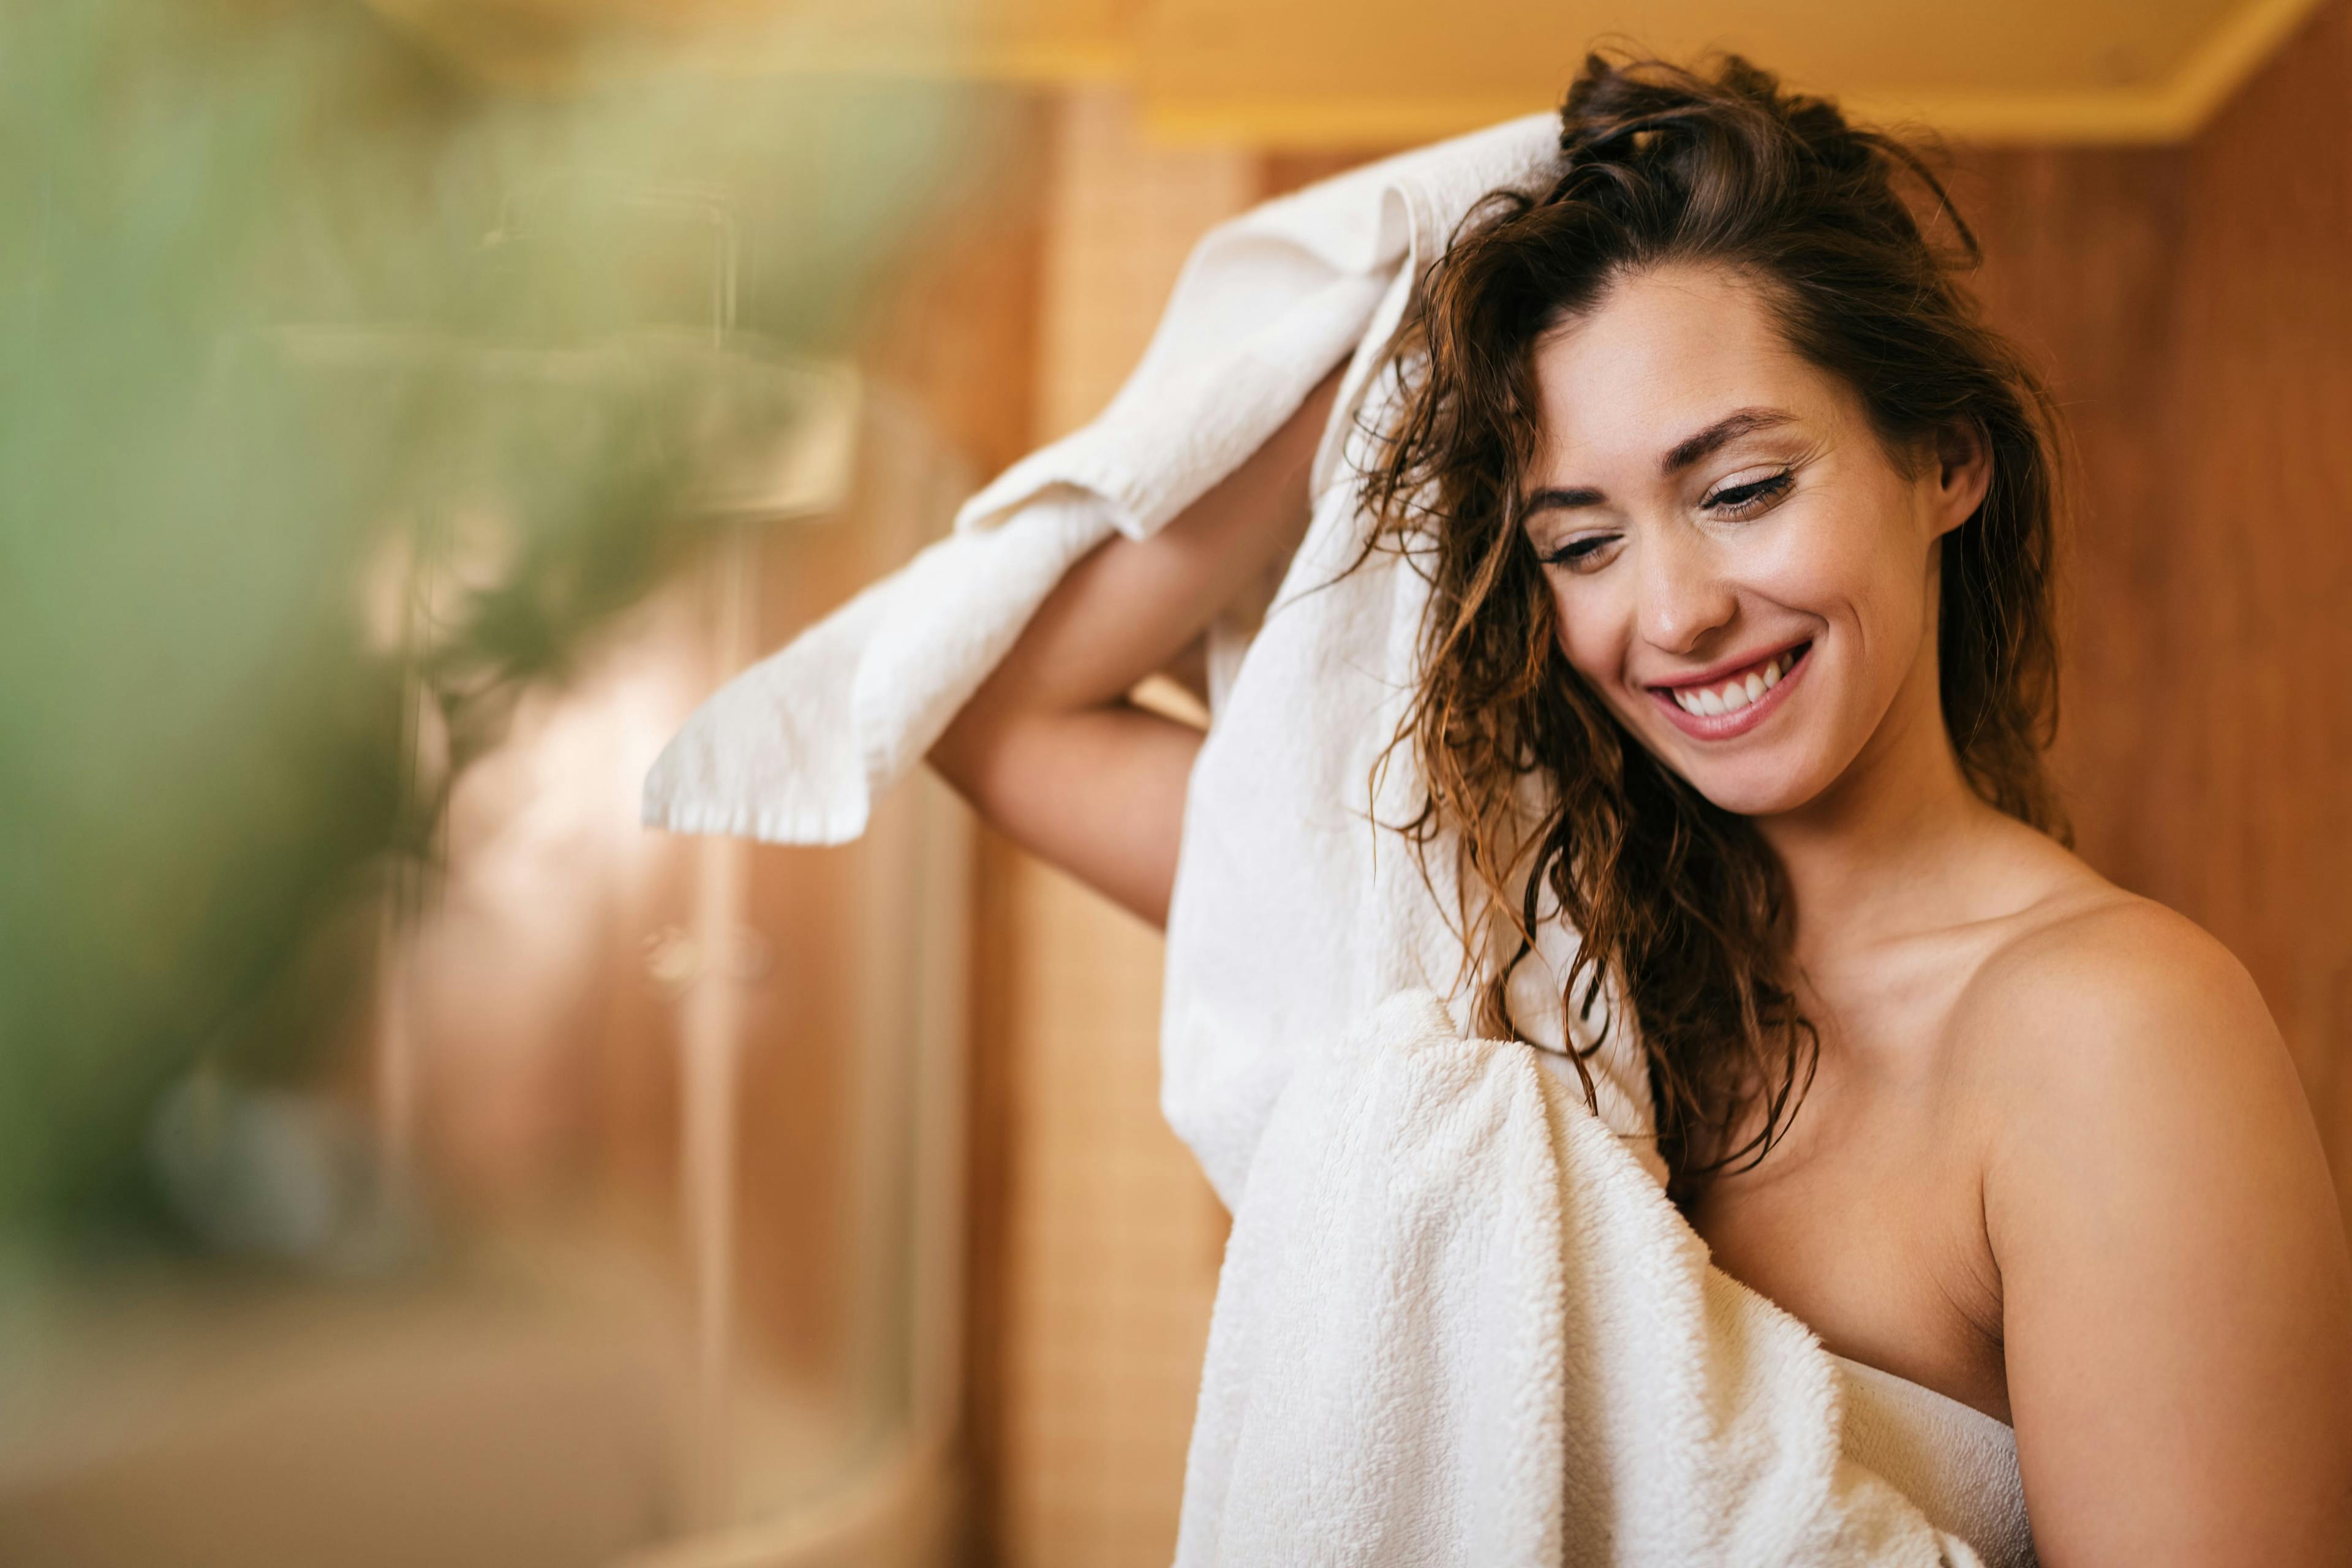 Image of woman drying her hair after washing